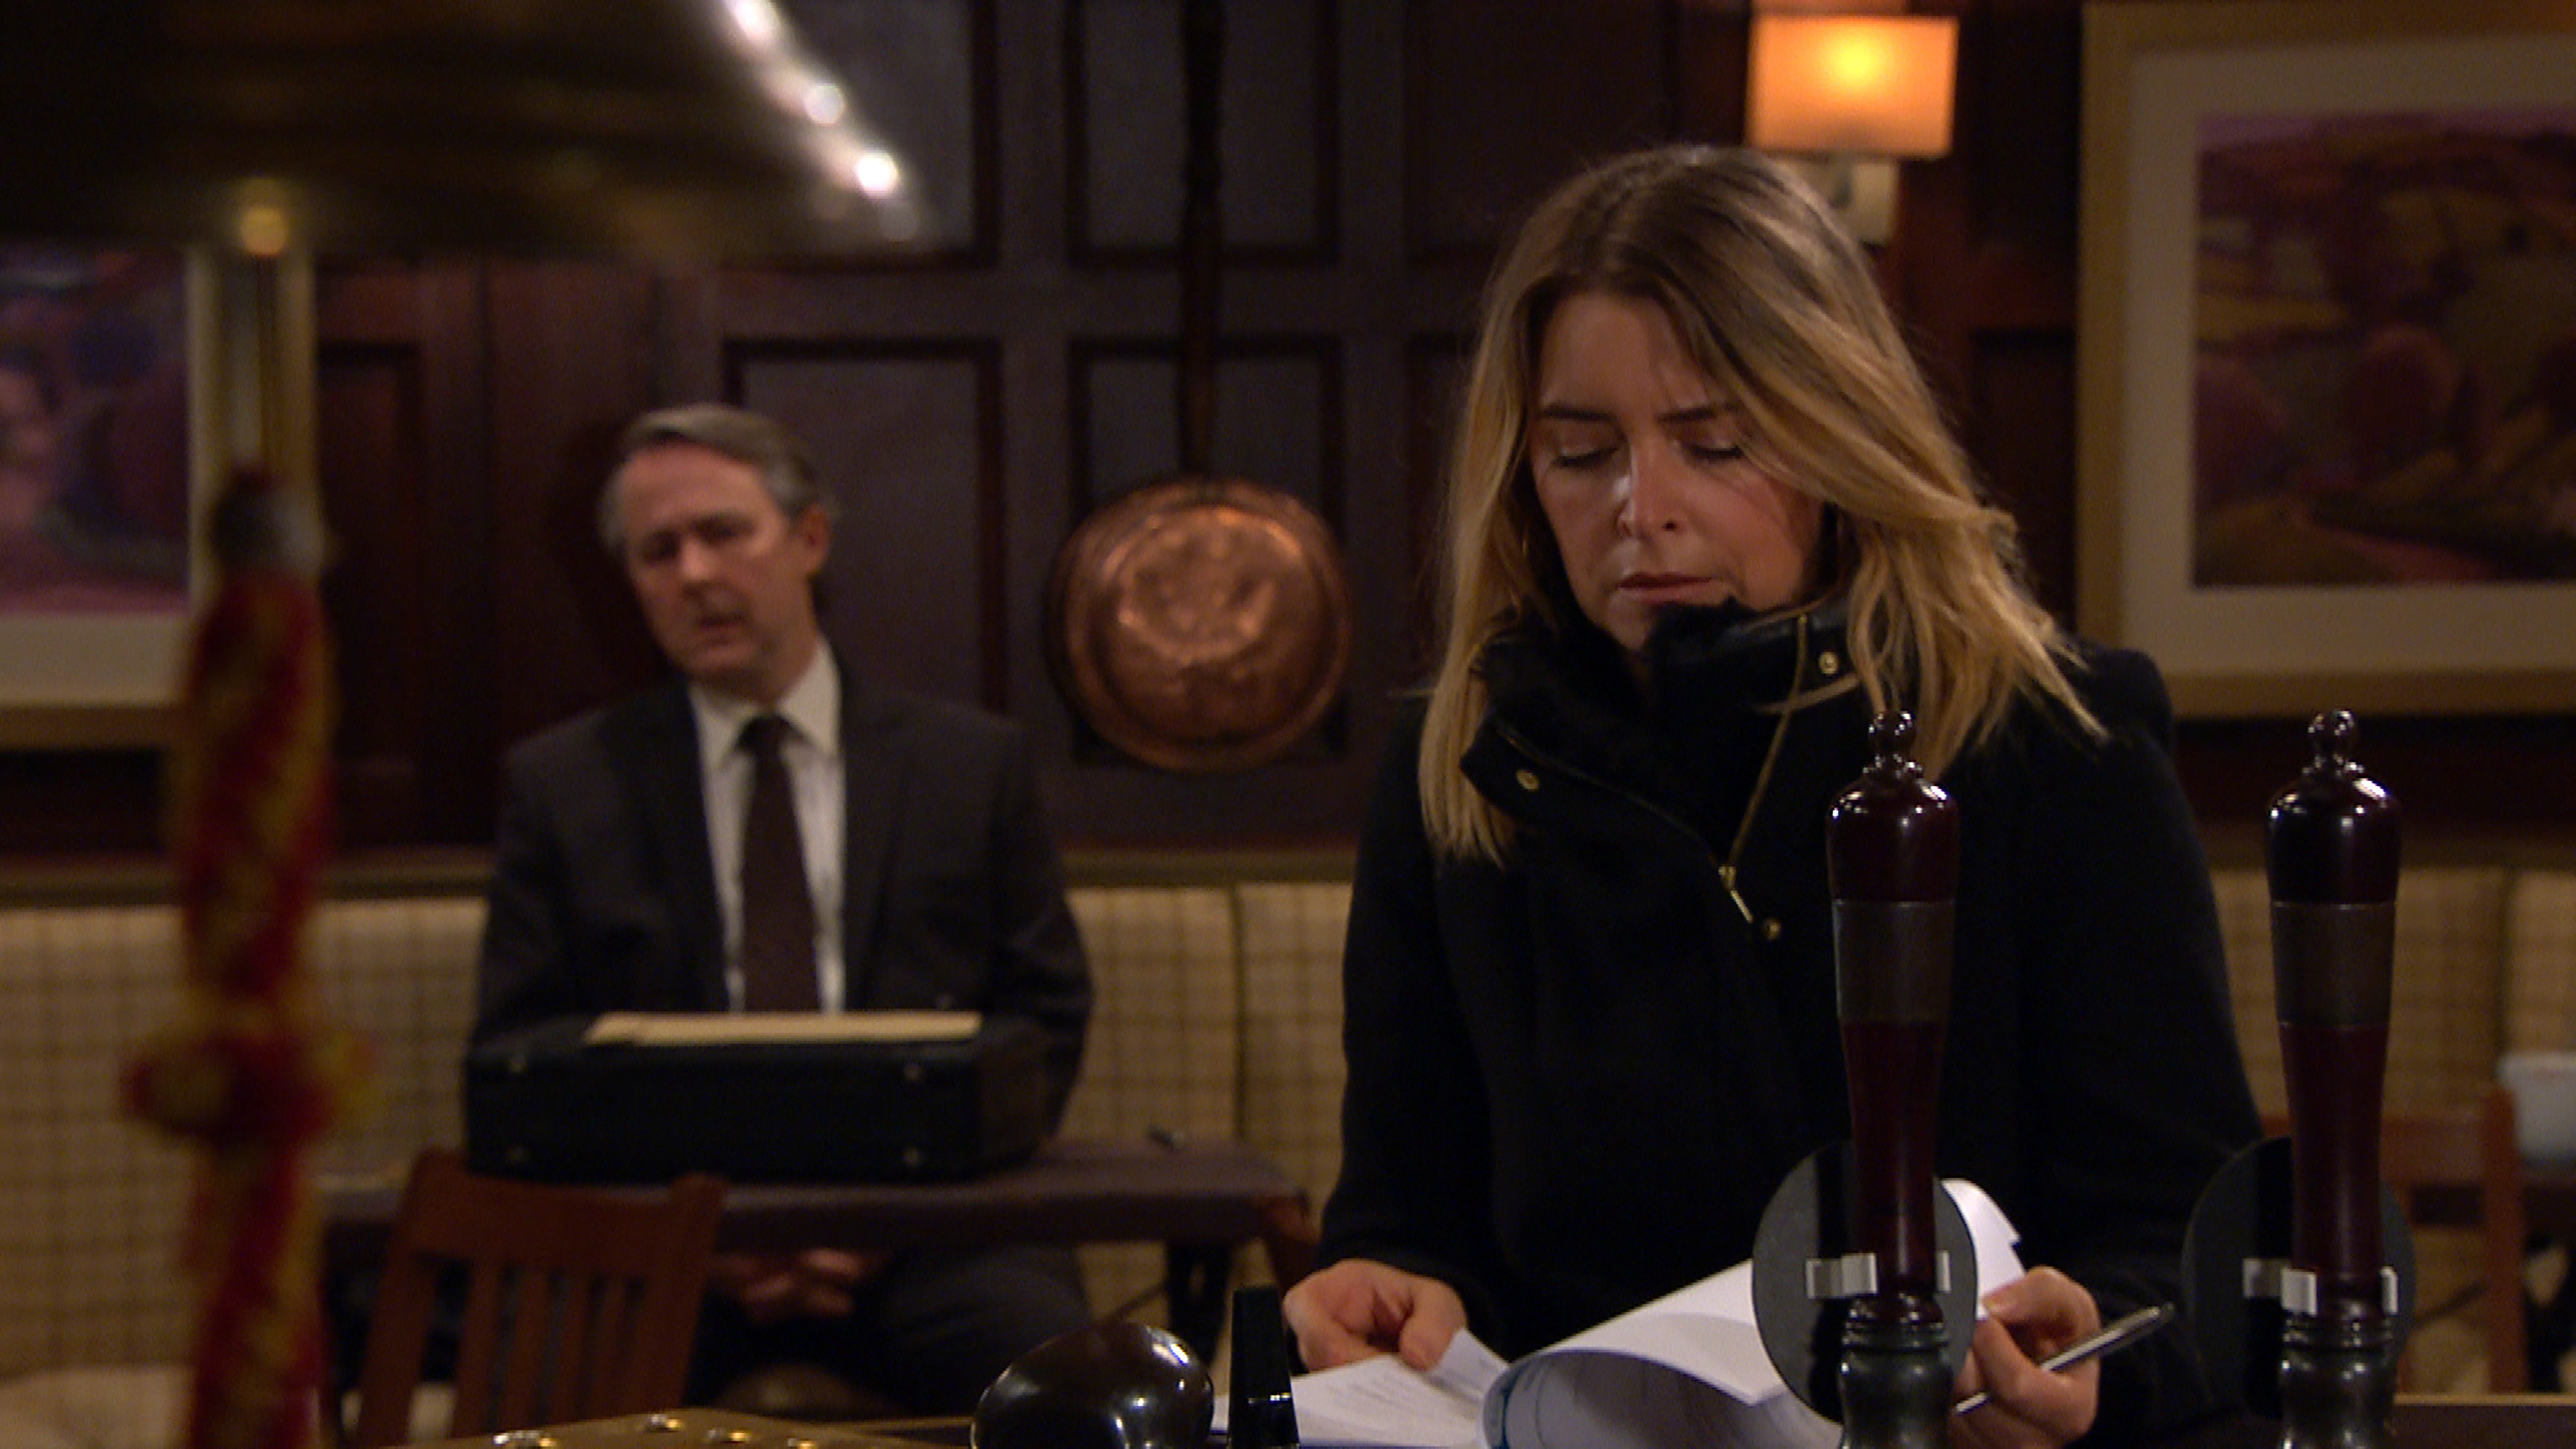 Emmerdale spoilers: Charity Dingle signs away the pub as her struggles deepen